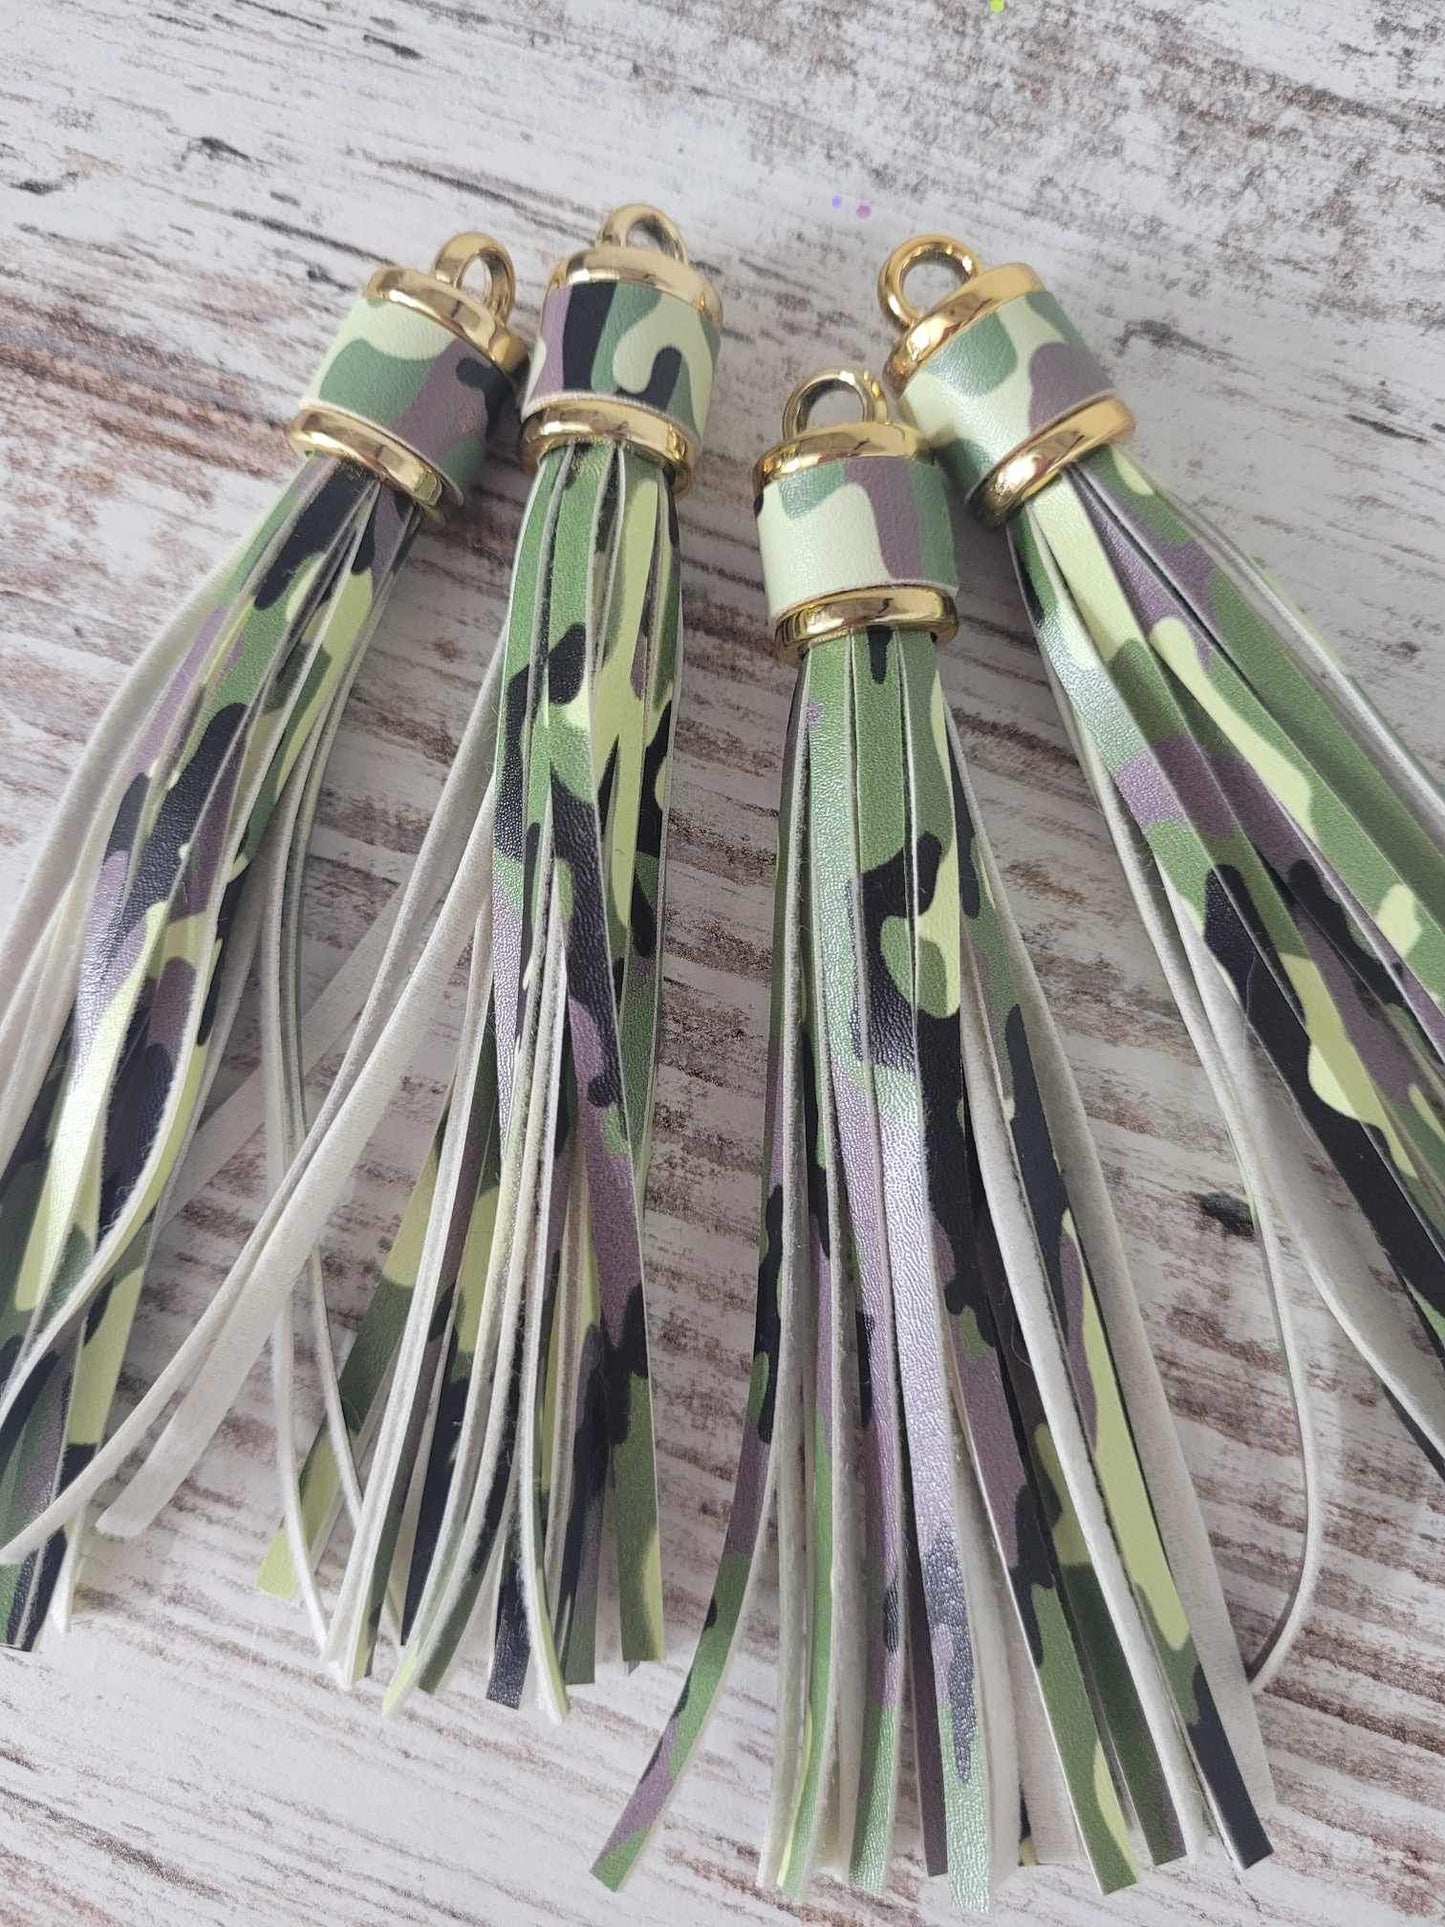 Keychain Tassels, Multiple Colors available, Backpacks, purses, Accessories.   Ships from the USA!